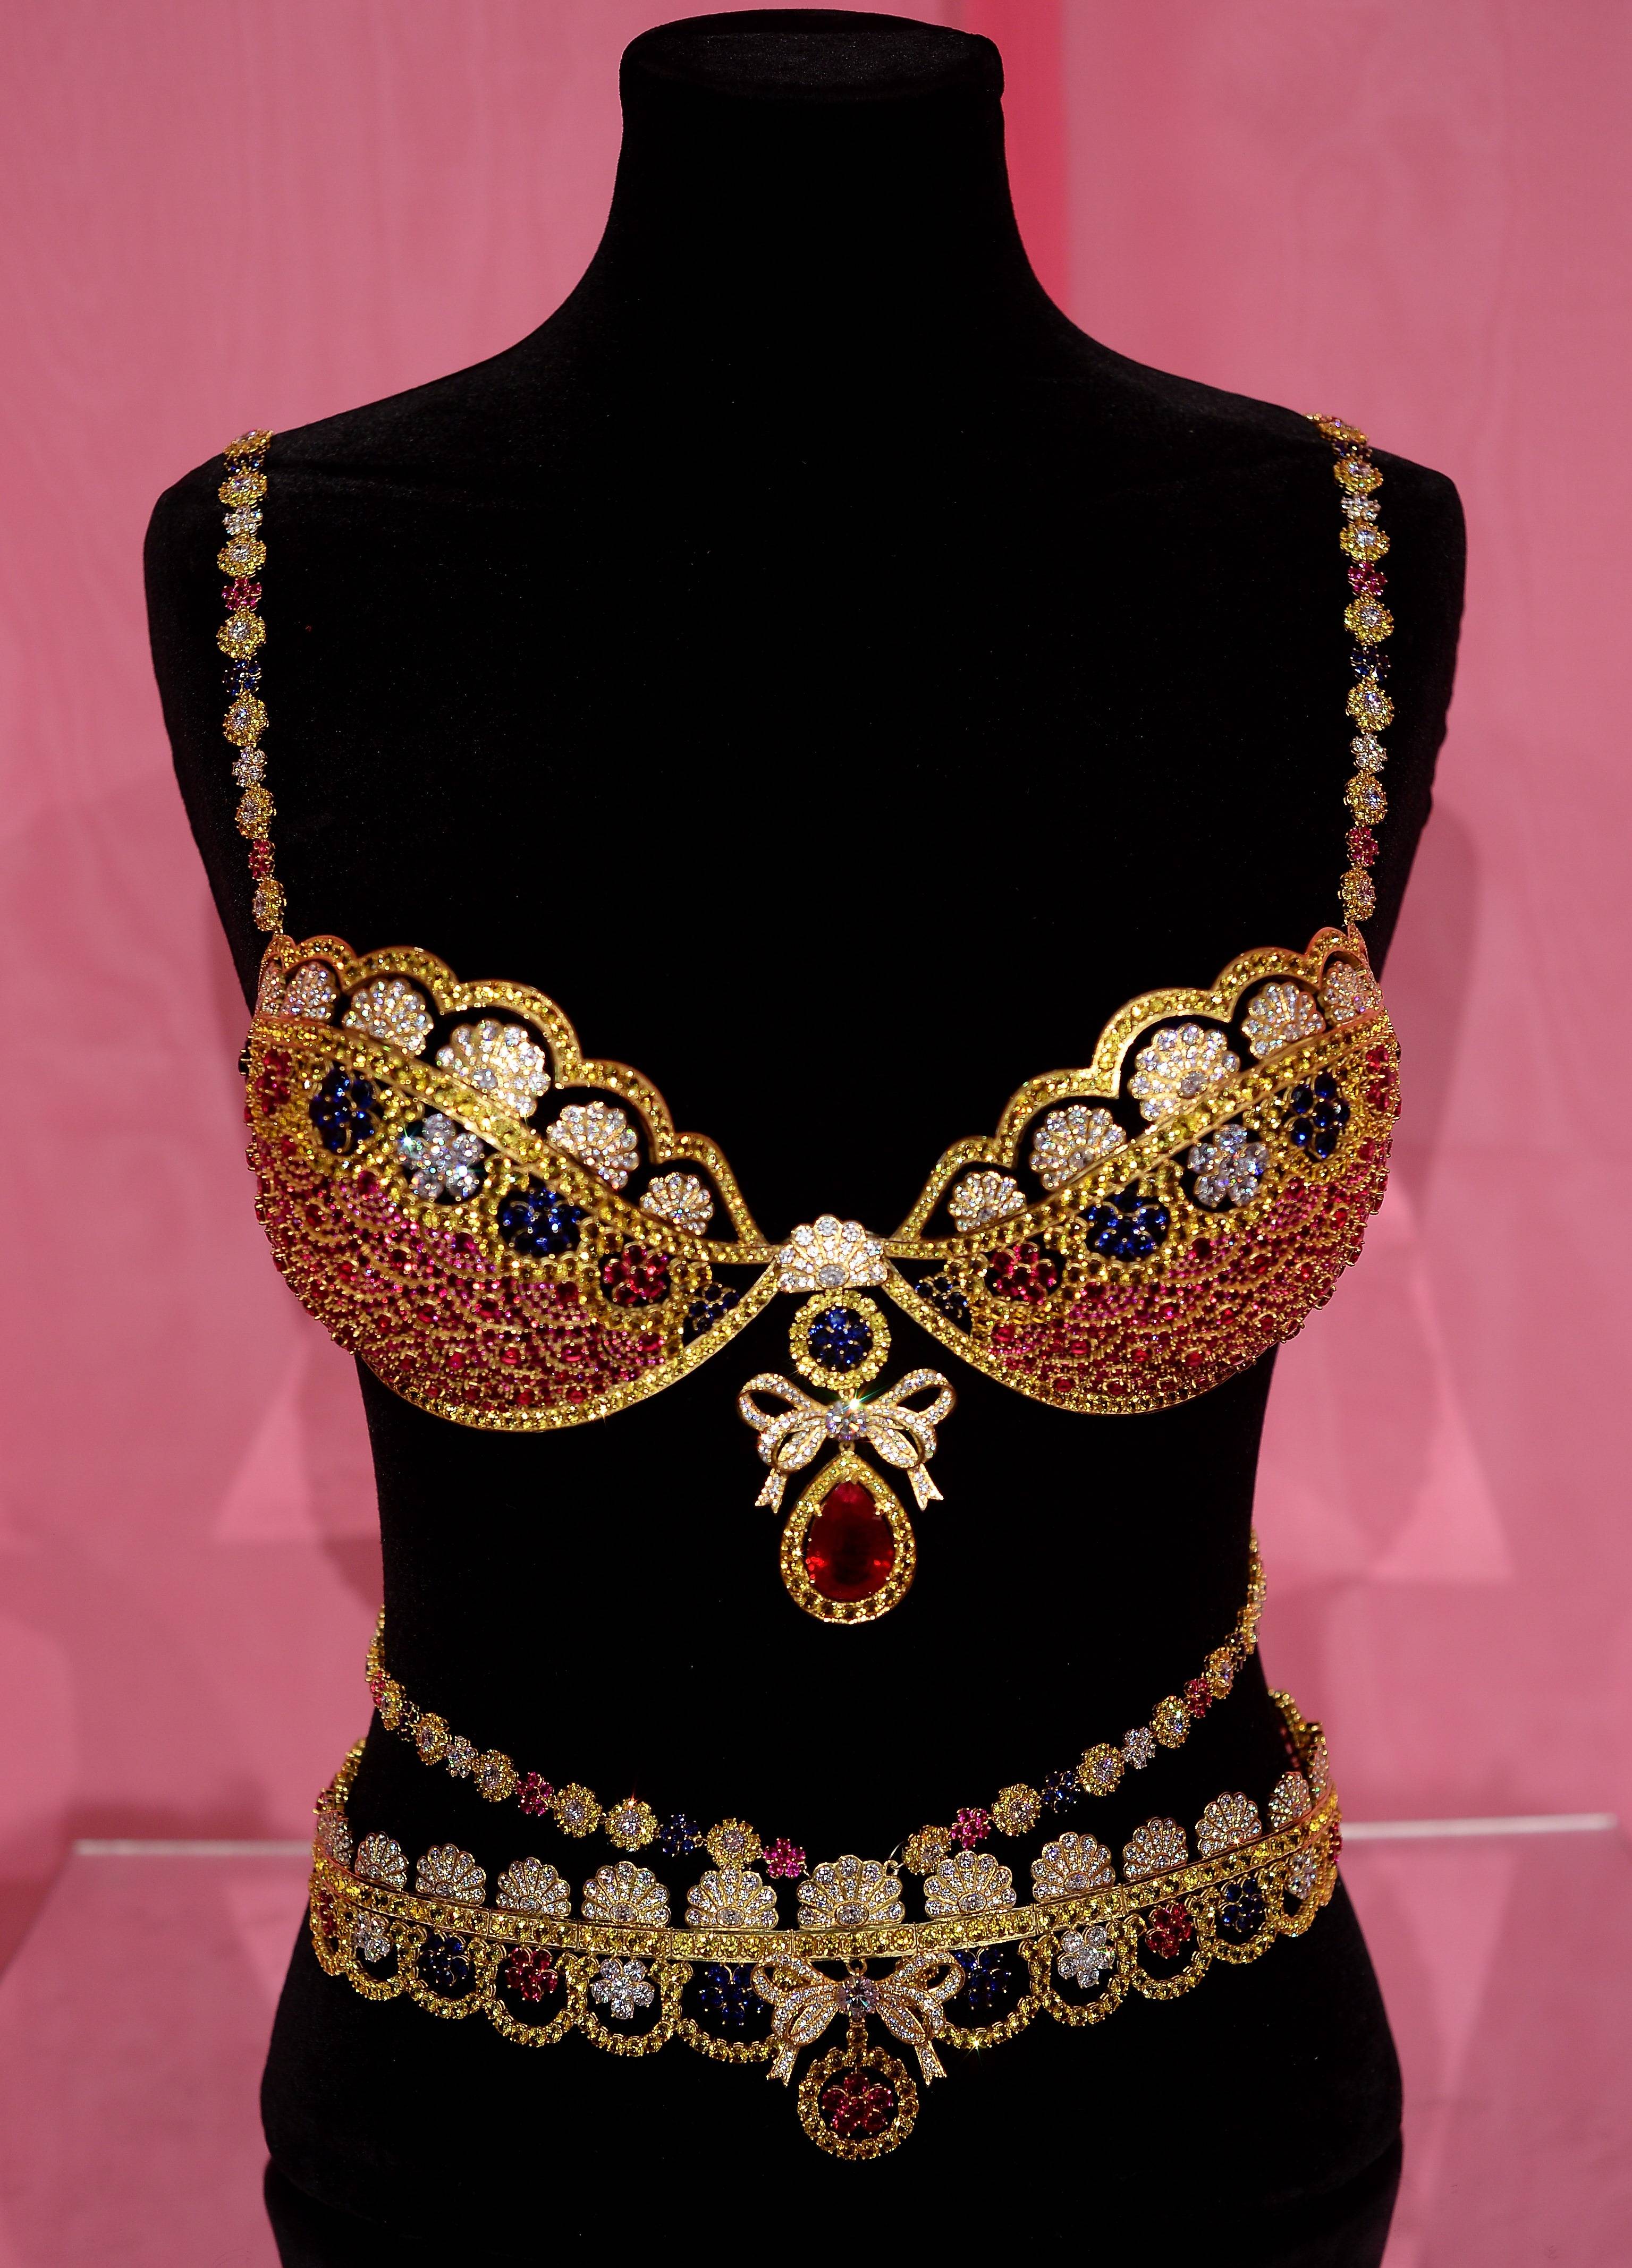 Victoria's Secret Fantasy Bra Makes its Debut in the Middle East